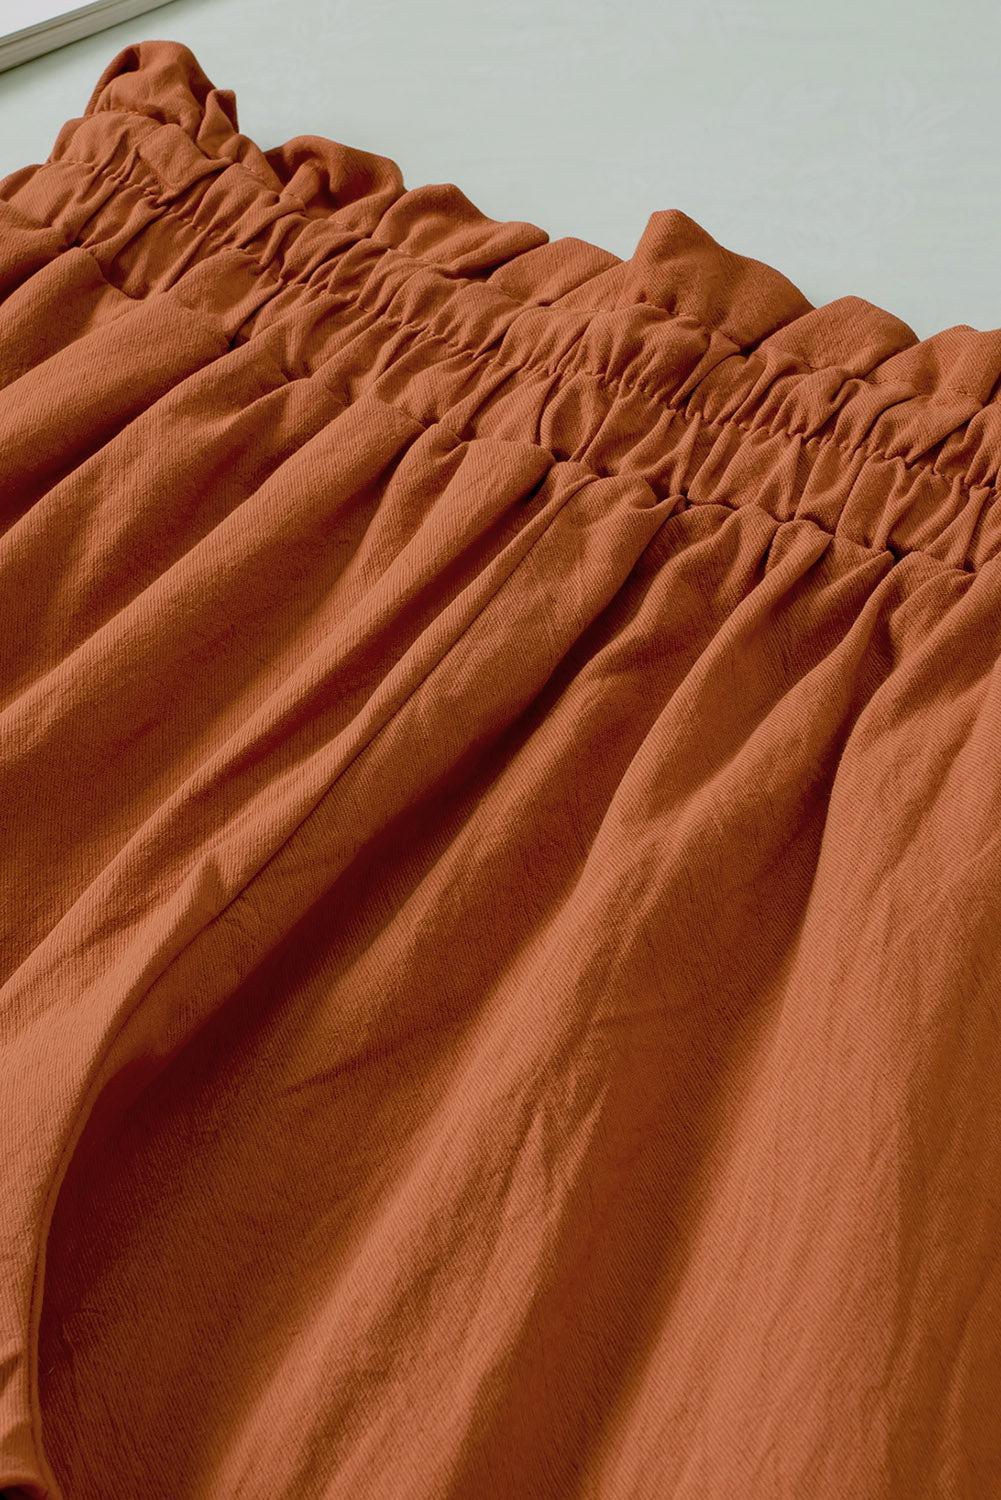 a close up of a bed with an orange comforter